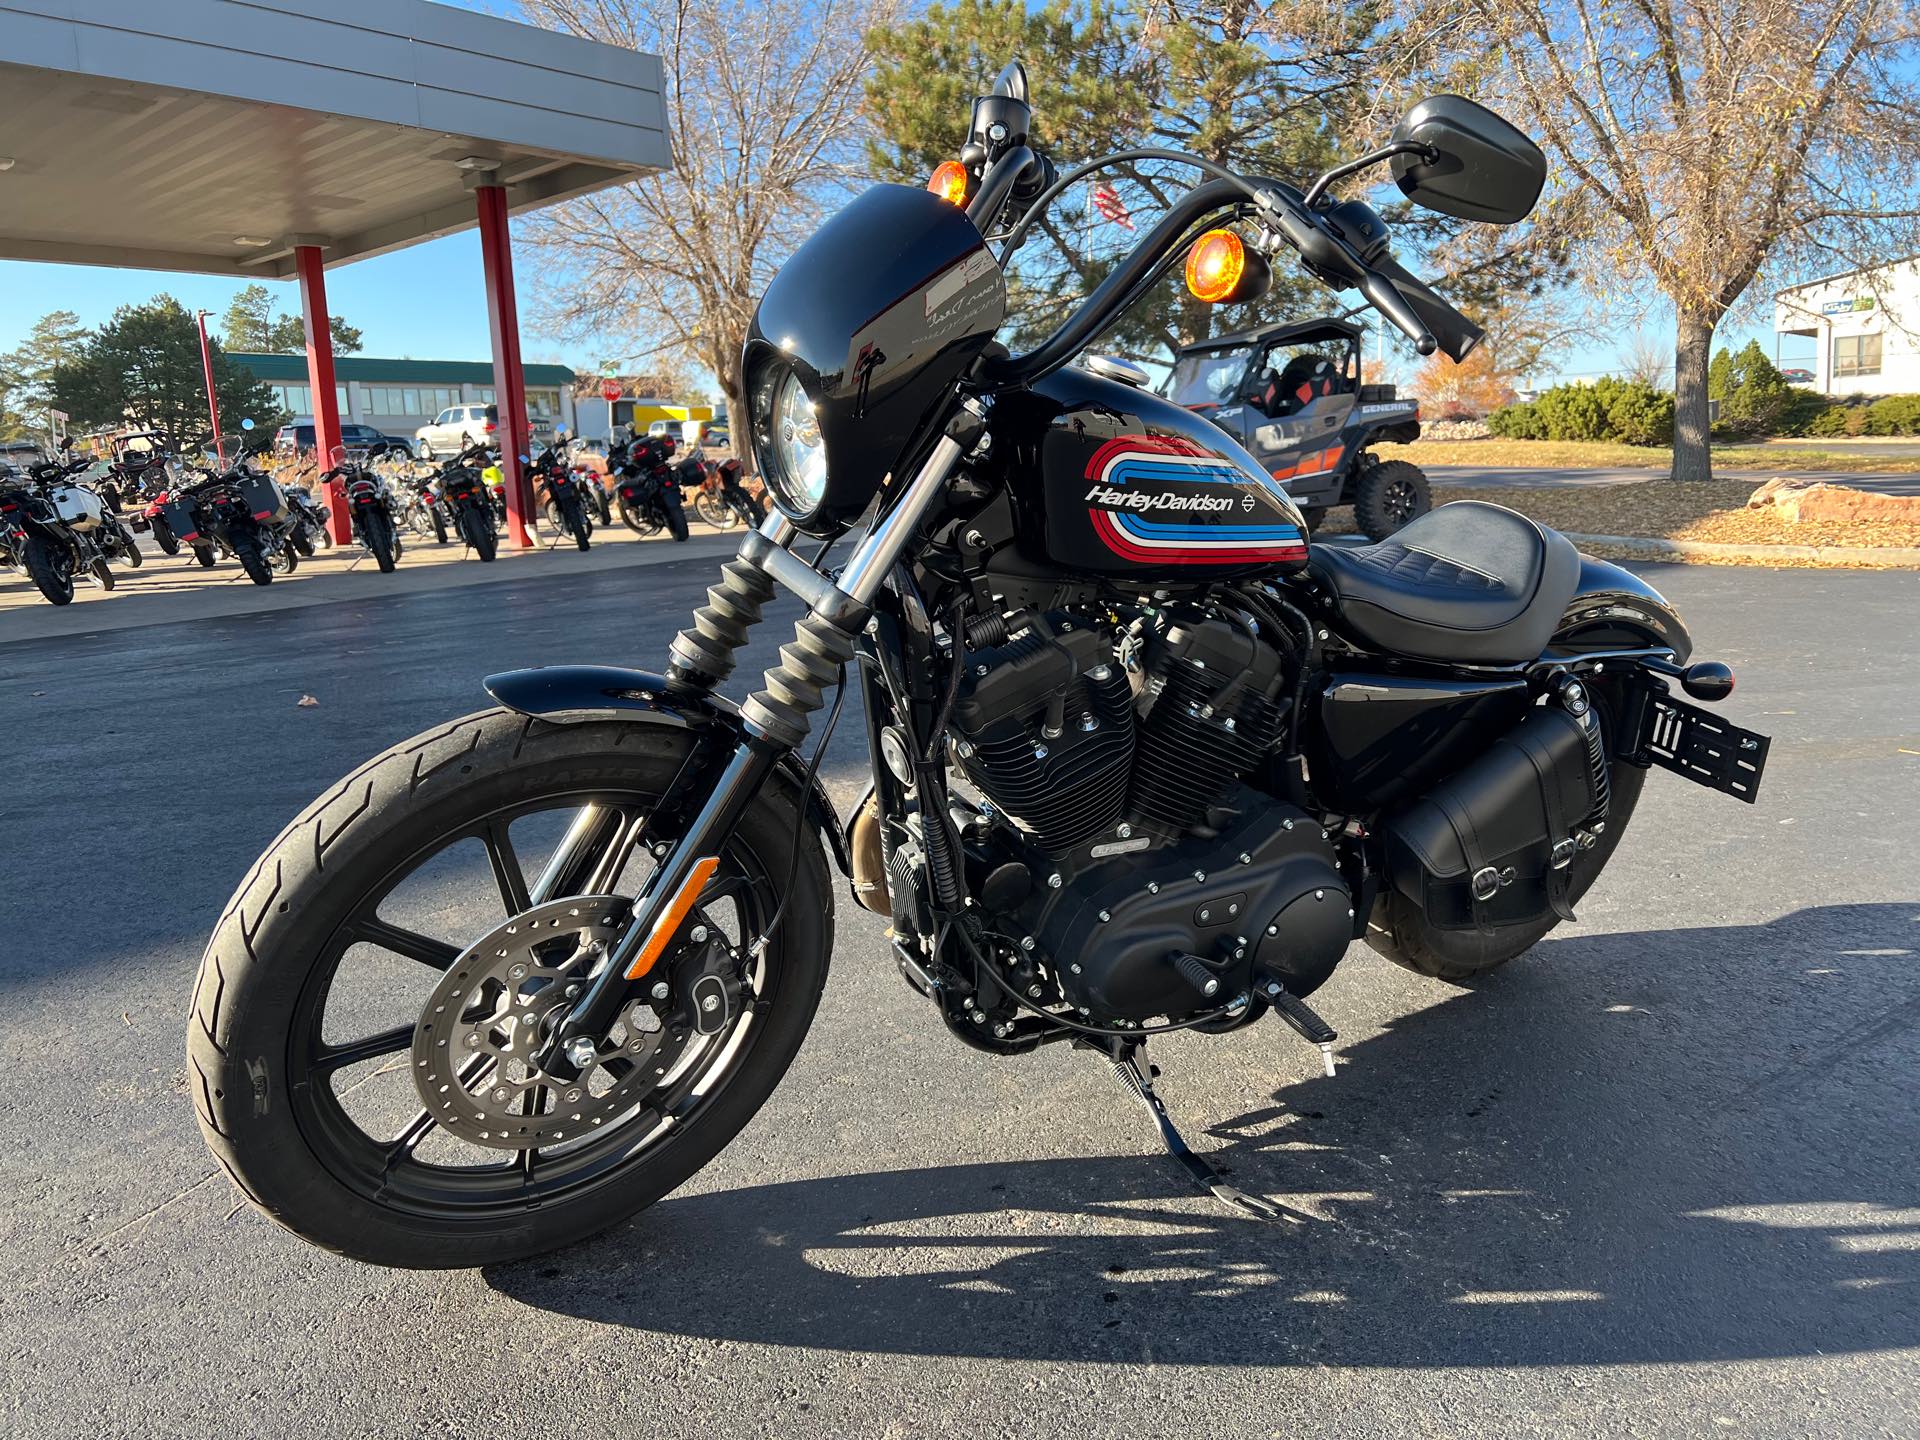 2021 Harley-Davidson Cruiser XL 1200NS Iron 1200 at Aces Motorcycles - Fort Collins